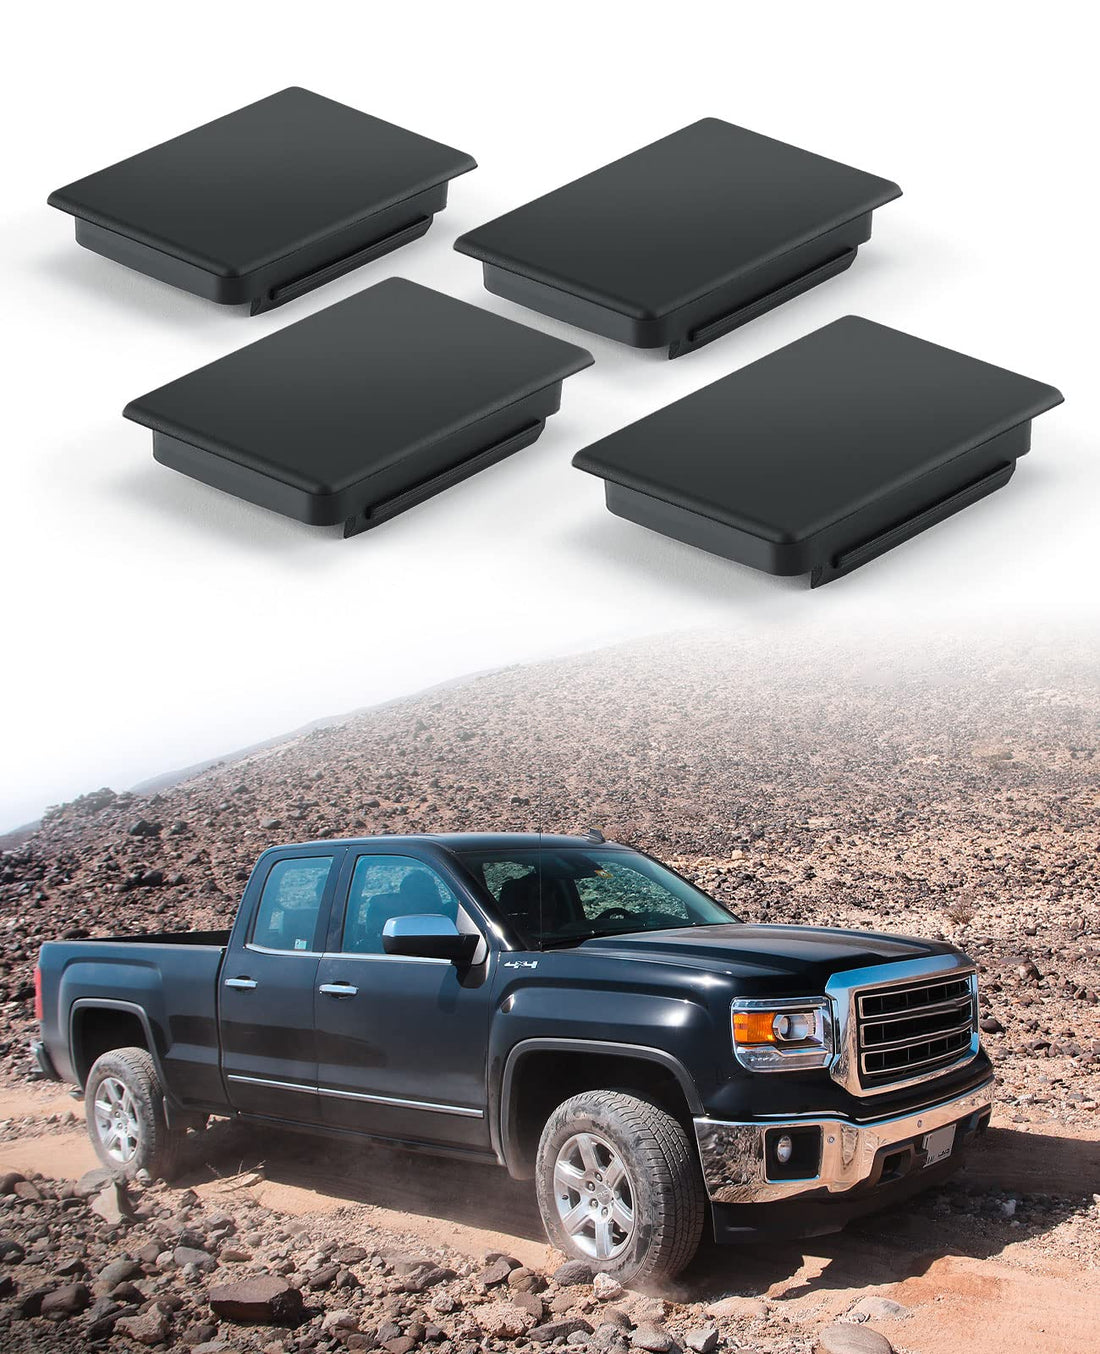 Stake Pocket Cover Trucks Bed Rail Stake Covers Fit for 1999-2014 Chevy Silverado and 2010-2014 GMC Sierra - 4 Pack